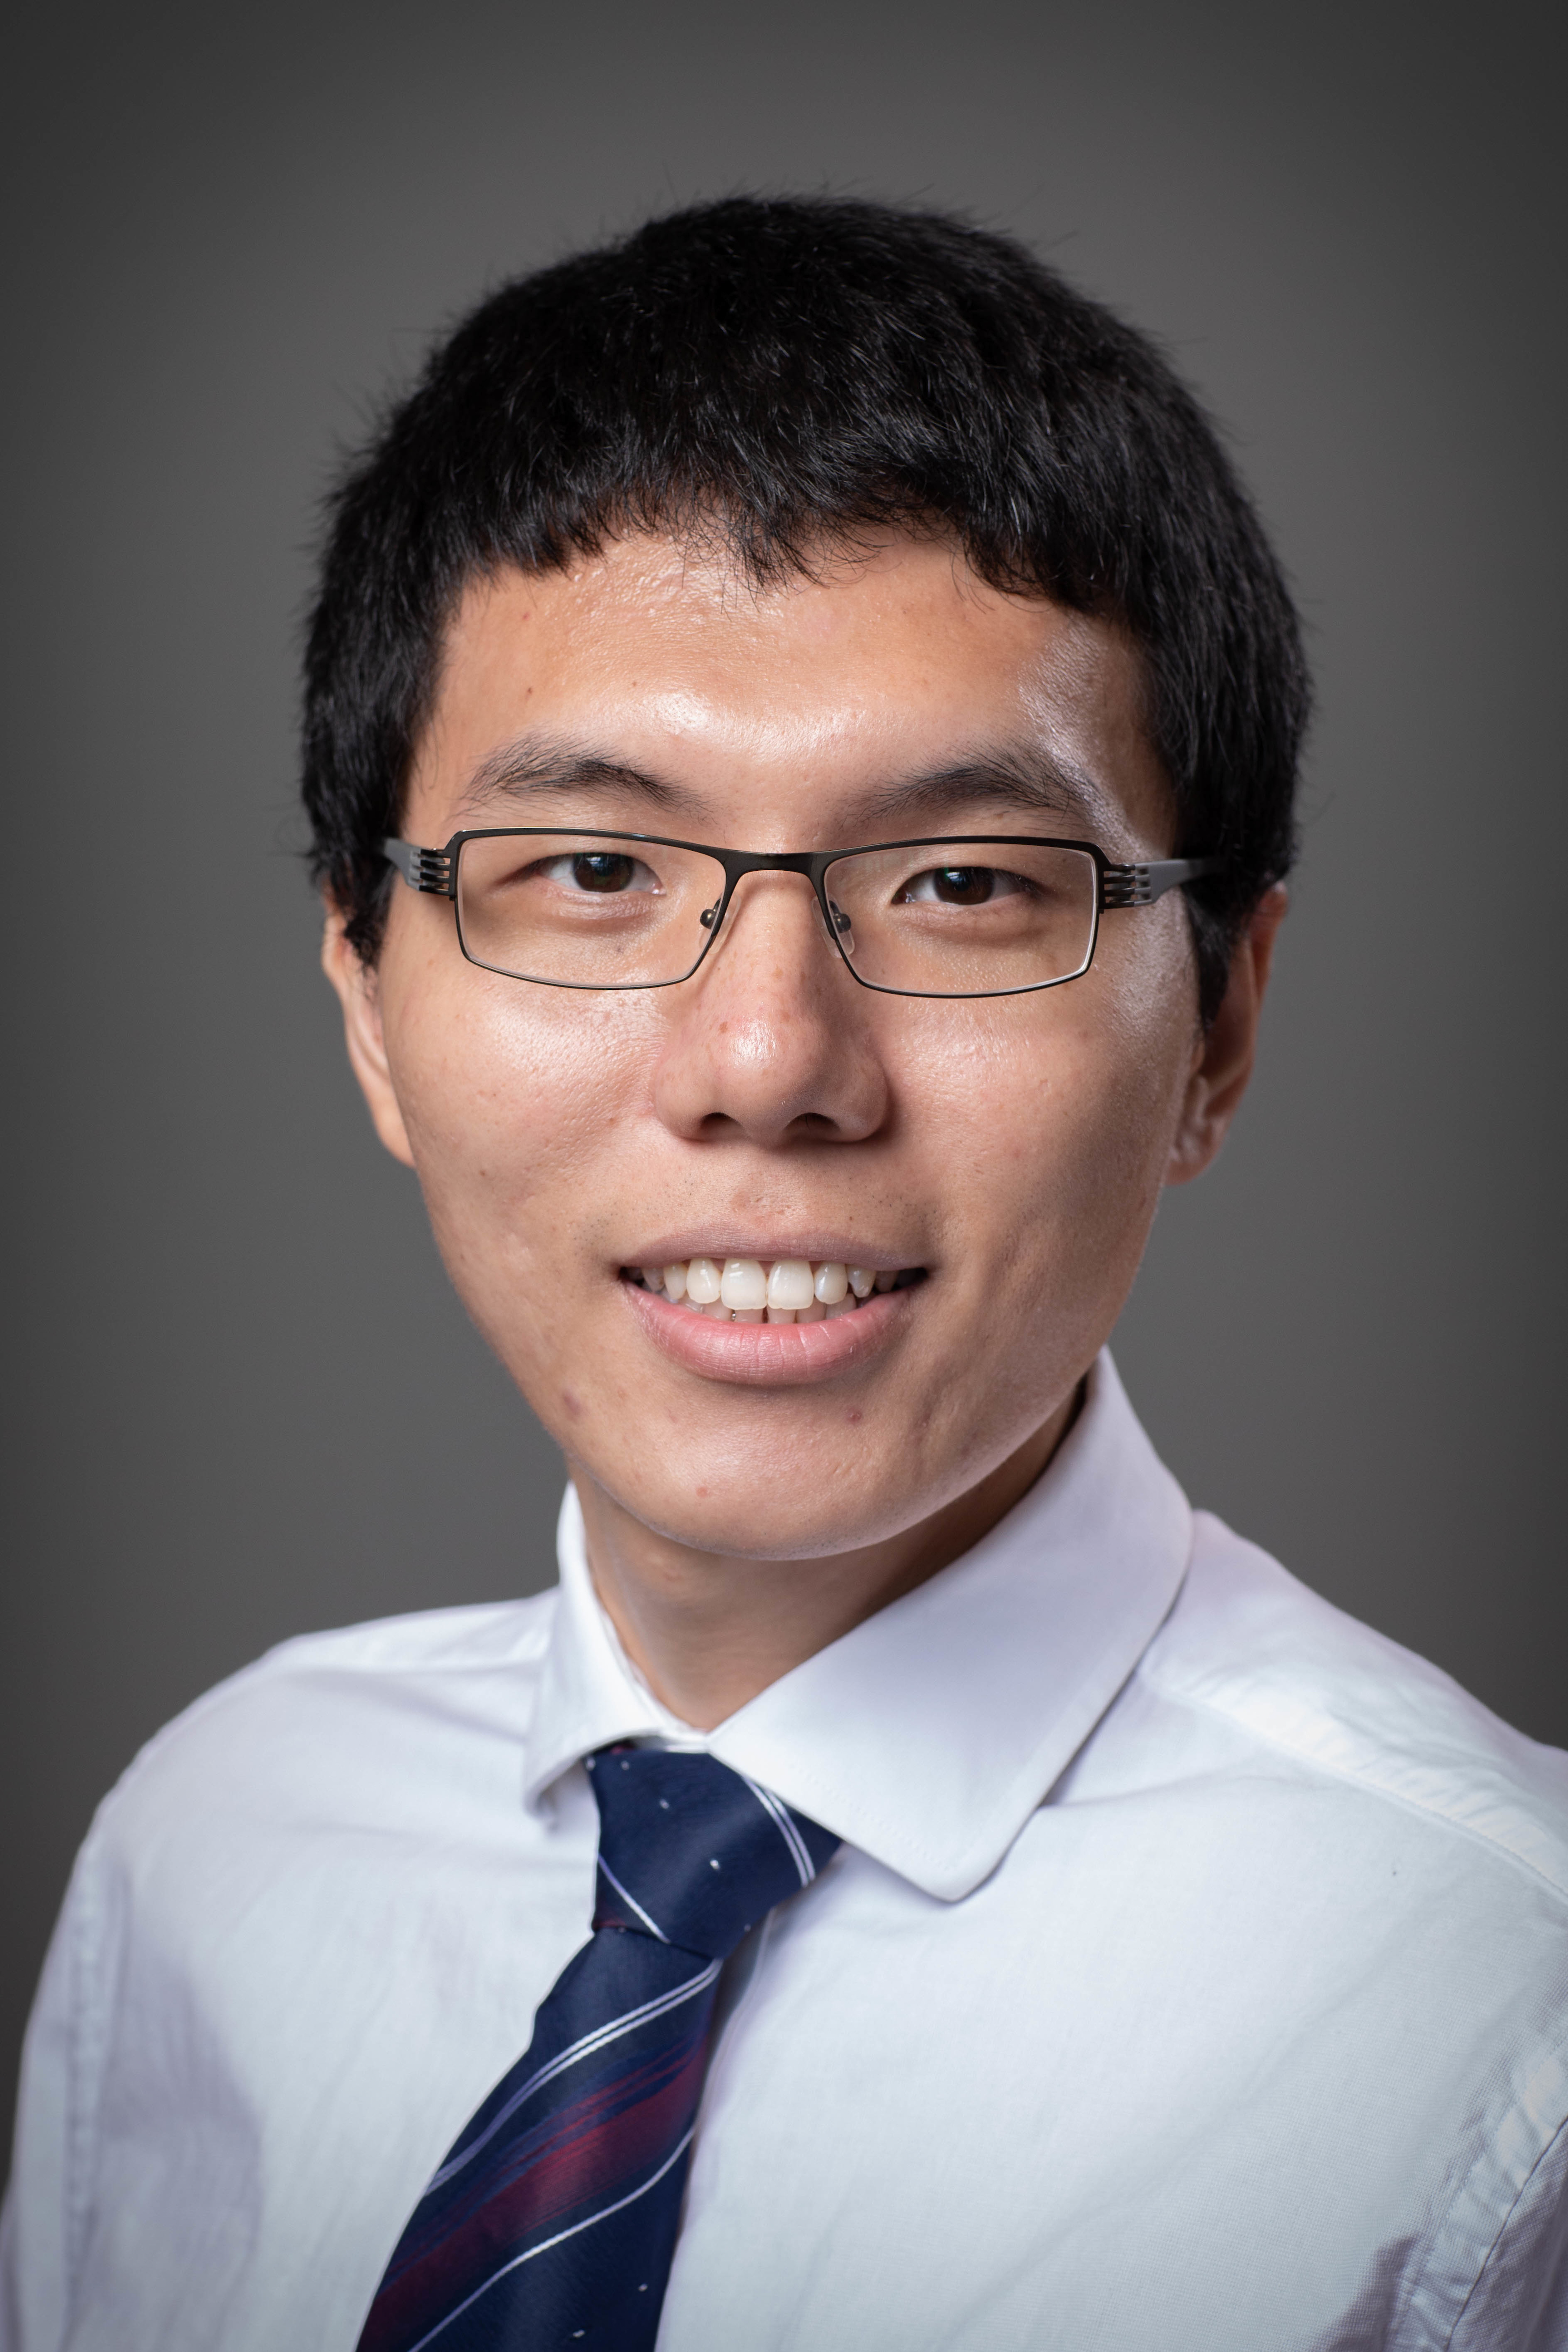 head shot of a young Asian man wearing glasses